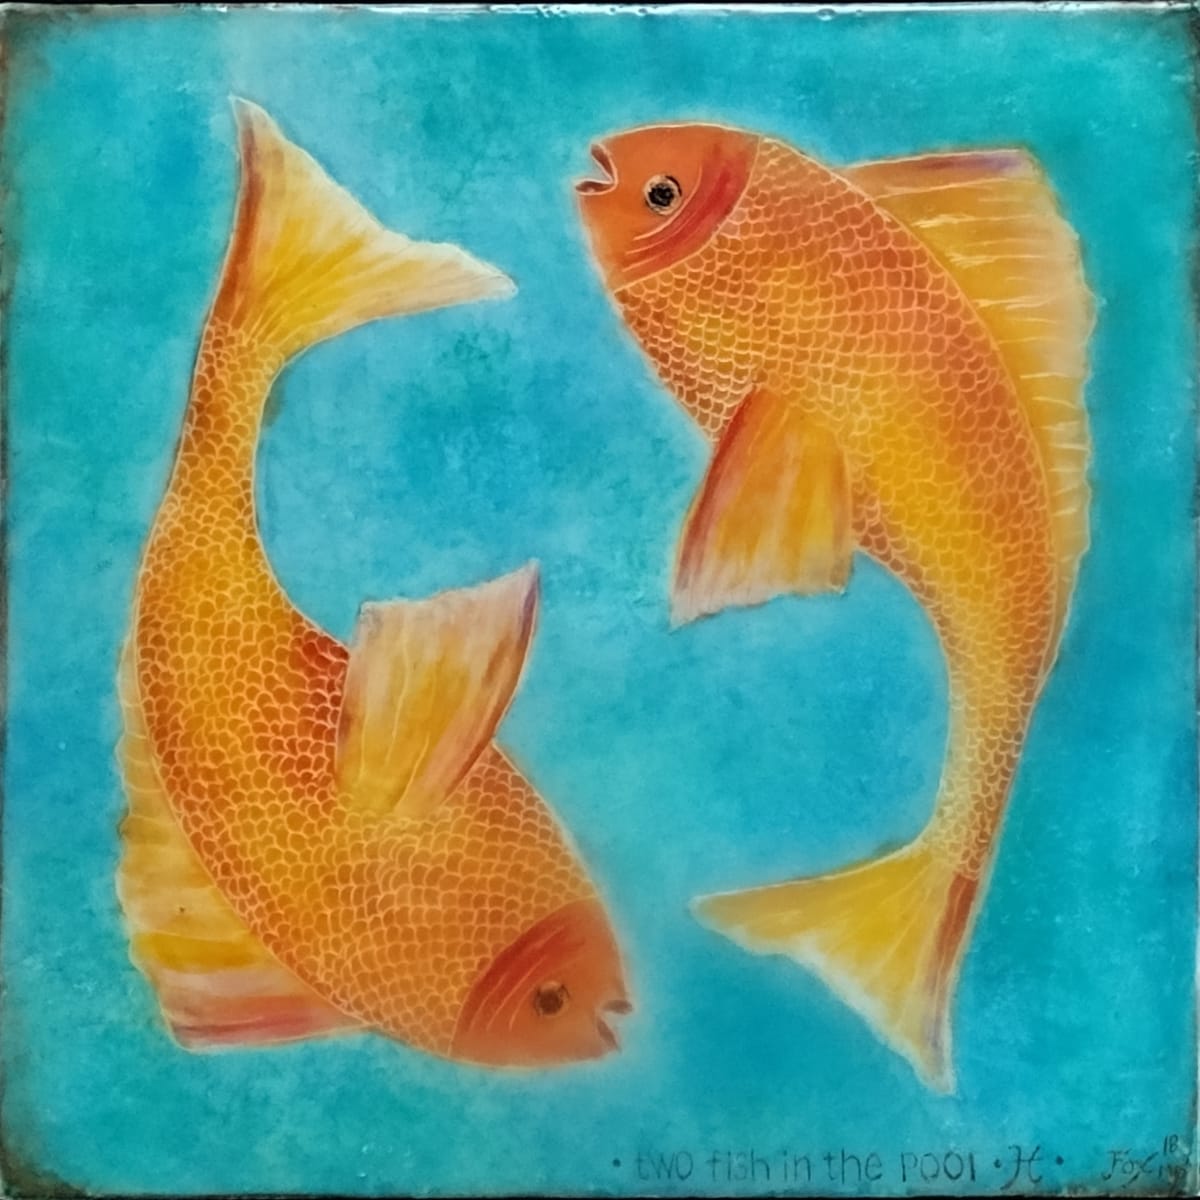 Two Fish in the Pool by Janet Fox 